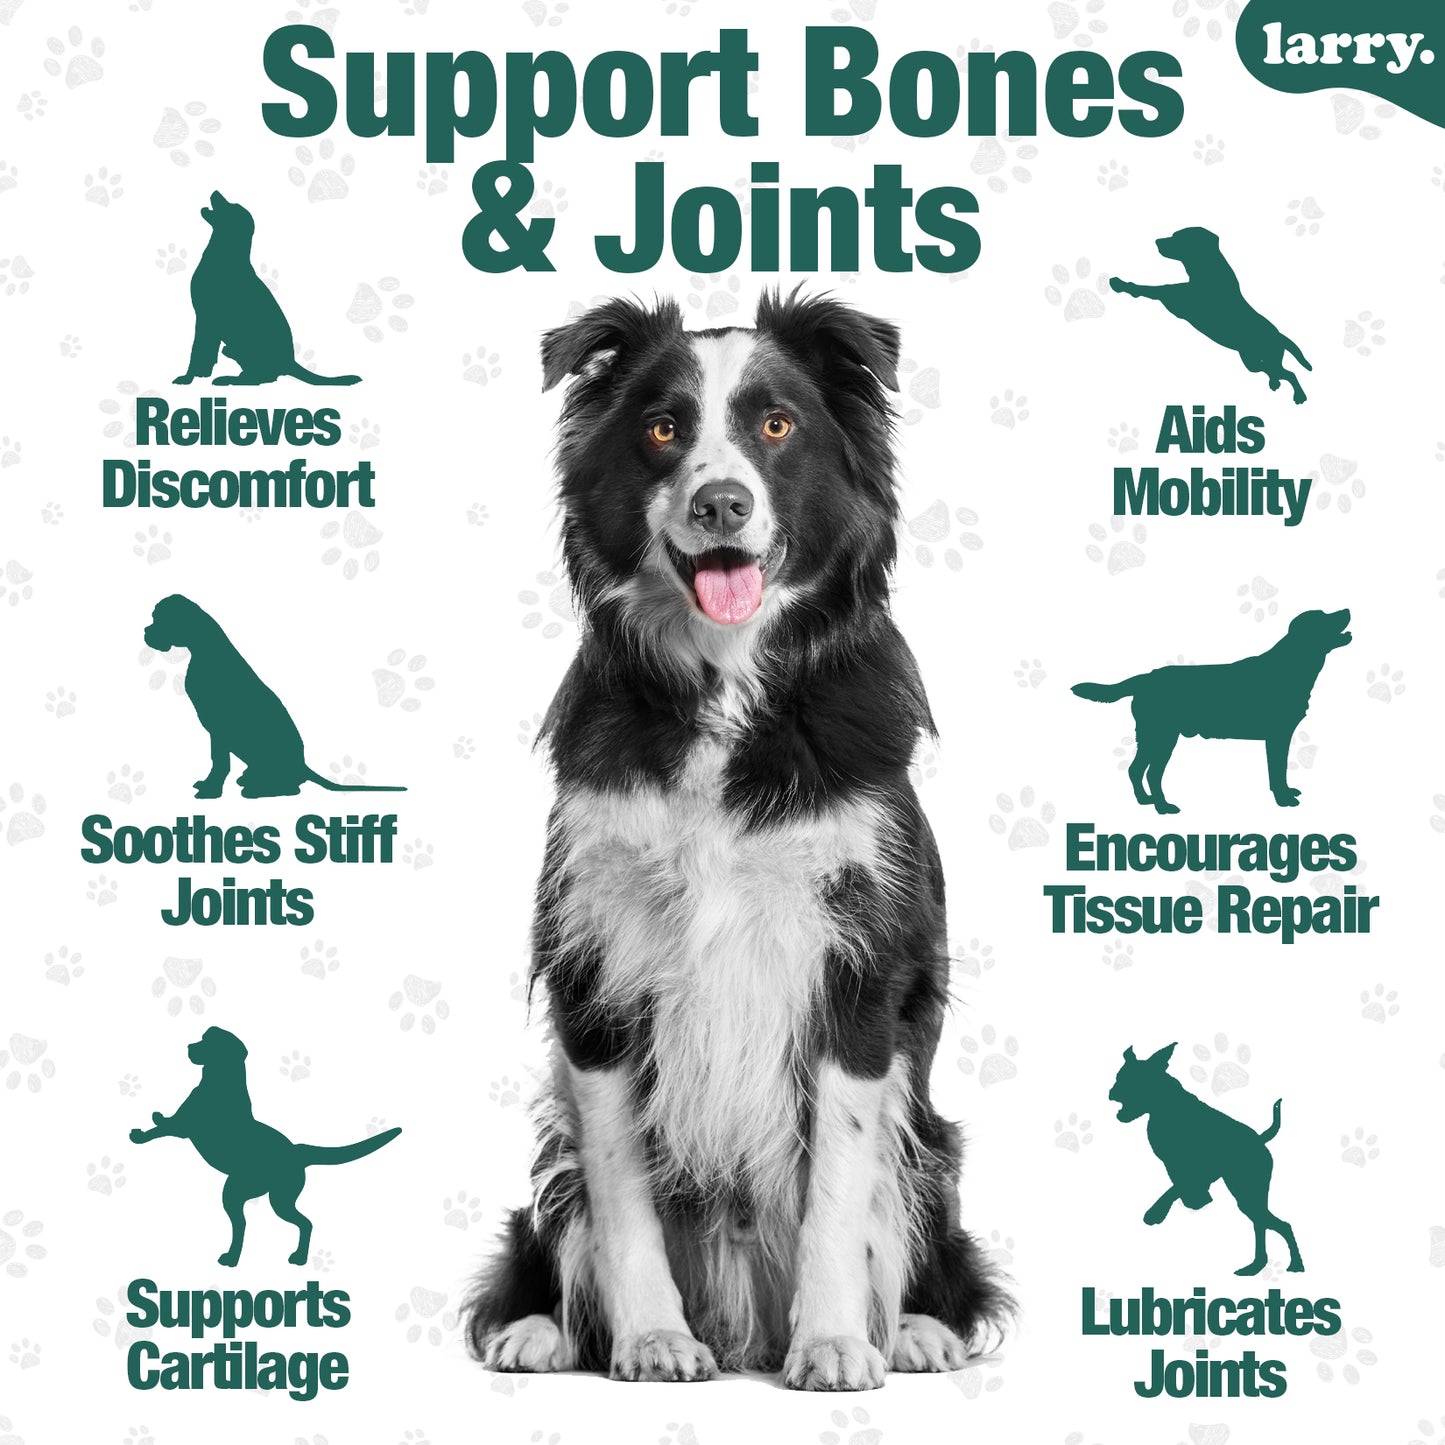 Larry Hip & Joint Support